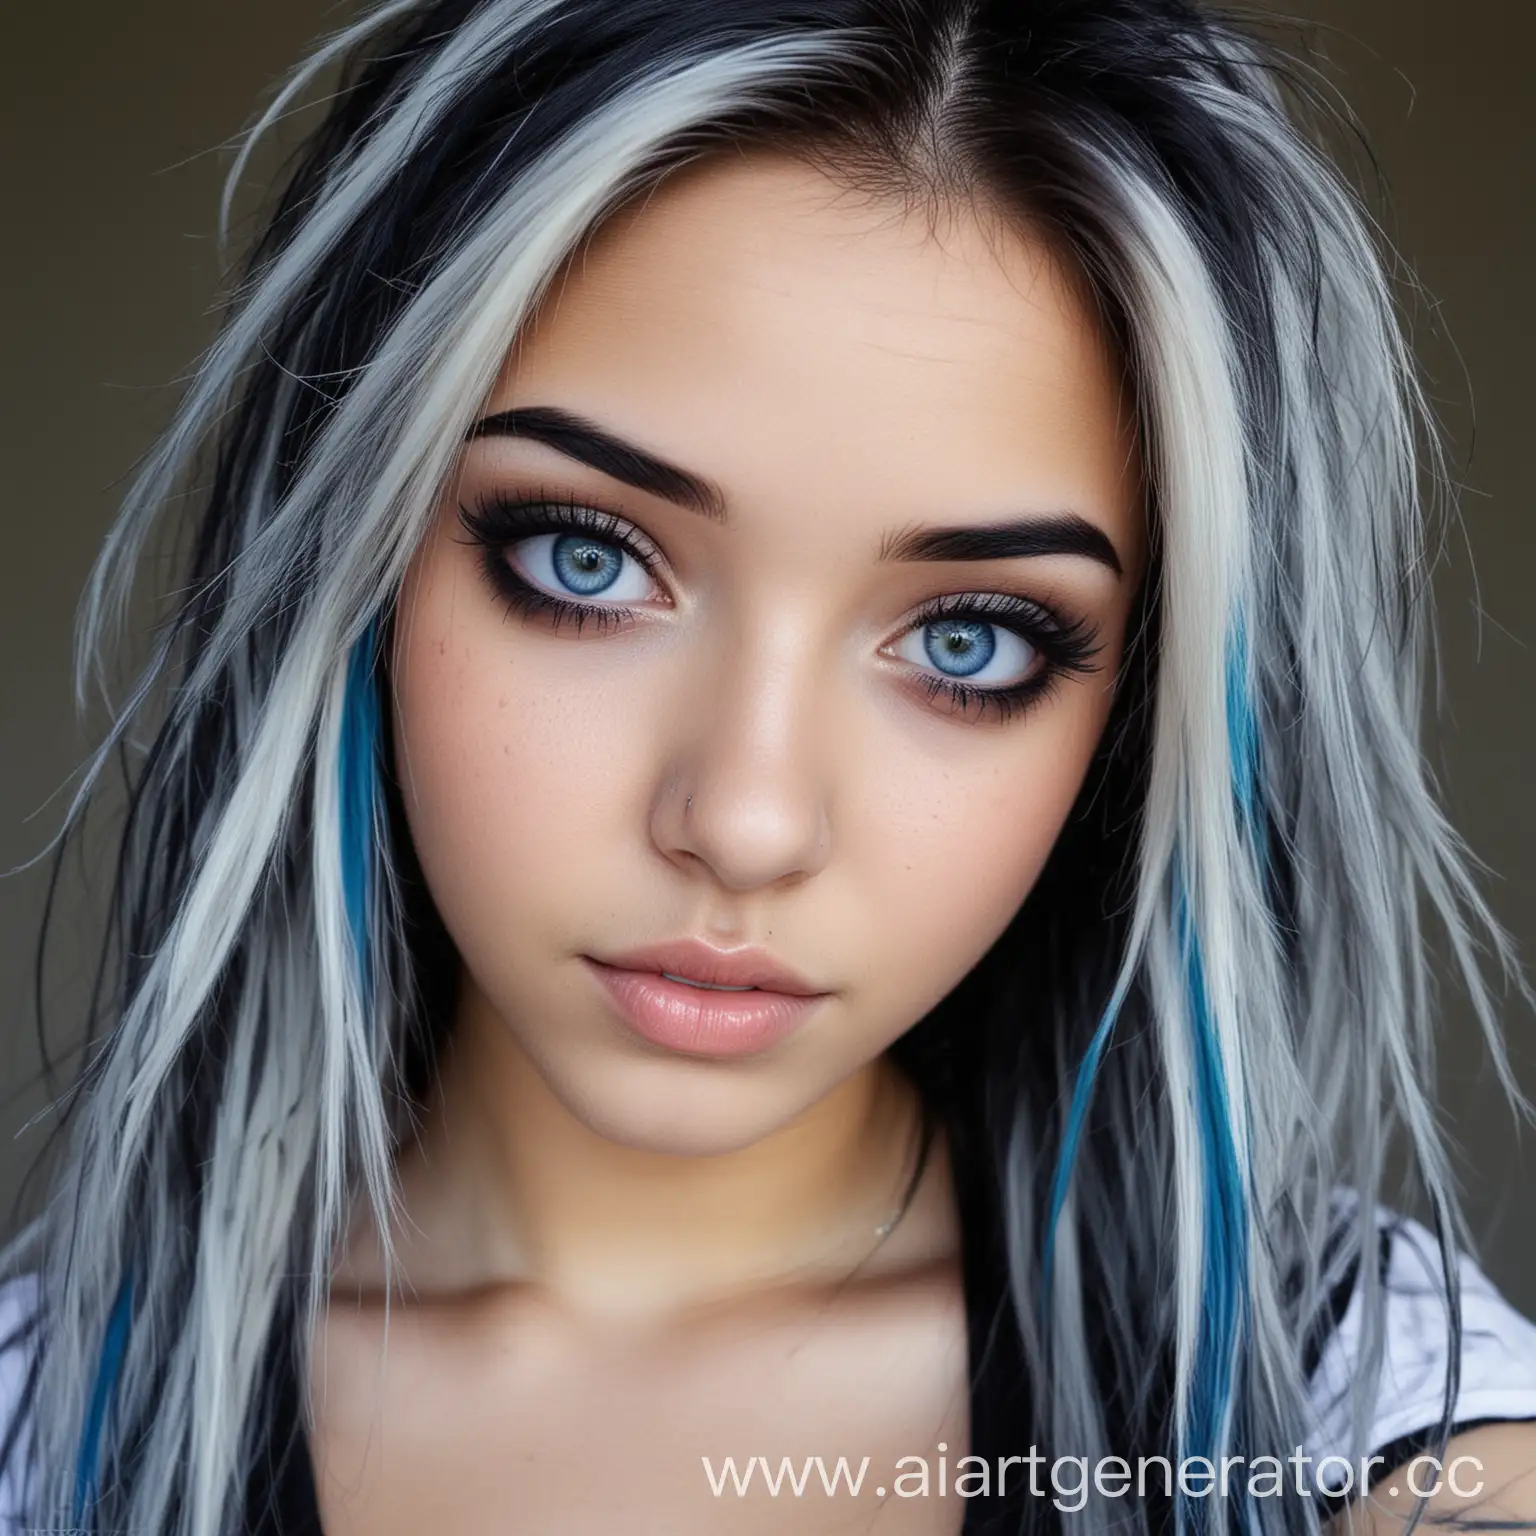 Stylish-Woman-with-Black-Hair-and-Blue-Streaks-and-Eyebrow-Piercing